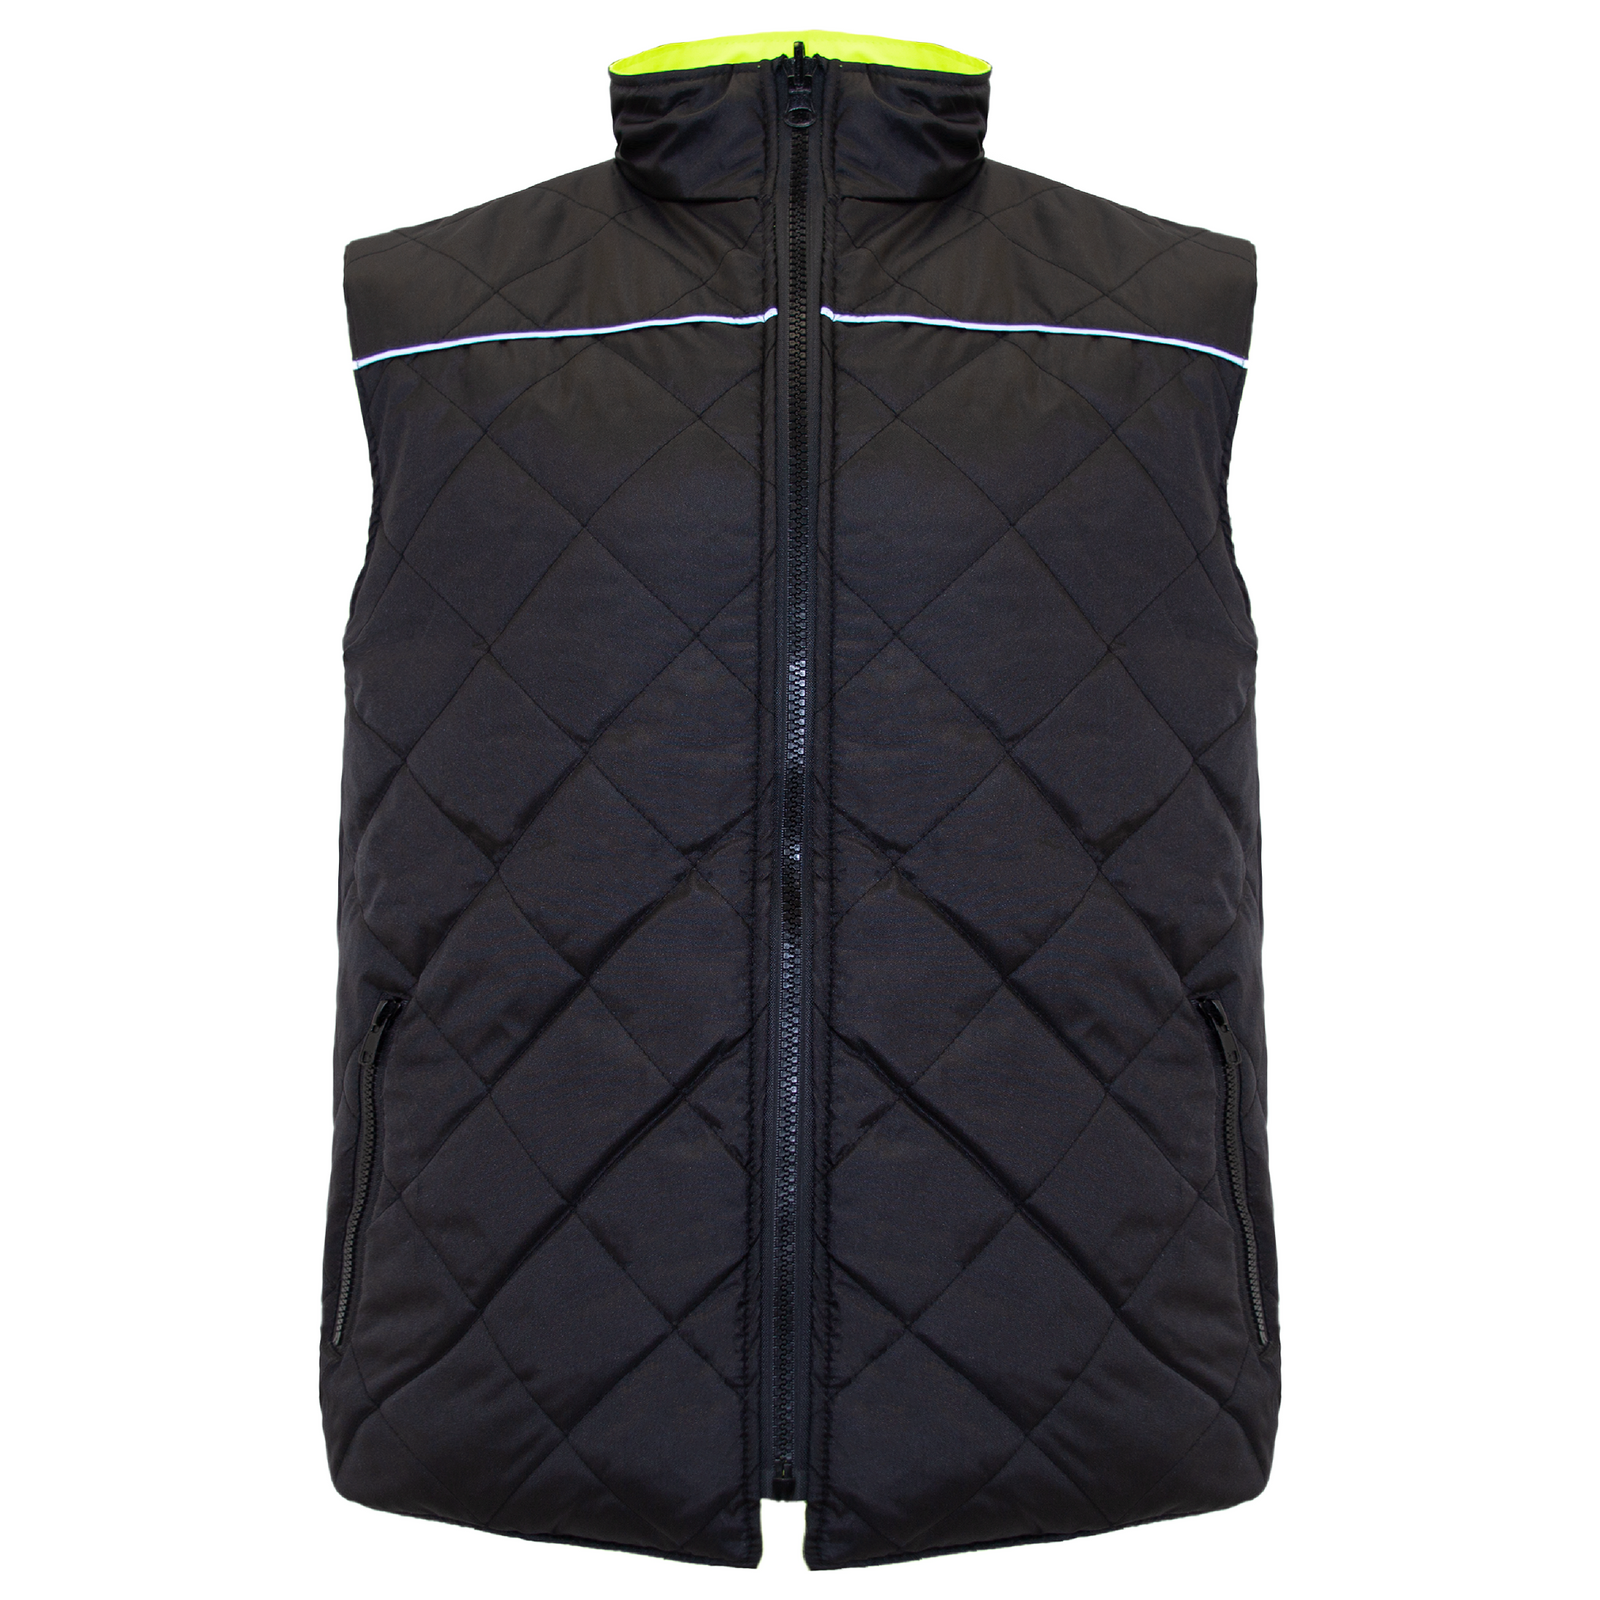 Features the black side of the JORESTECH® reversible insulated safety vest with reflective strips